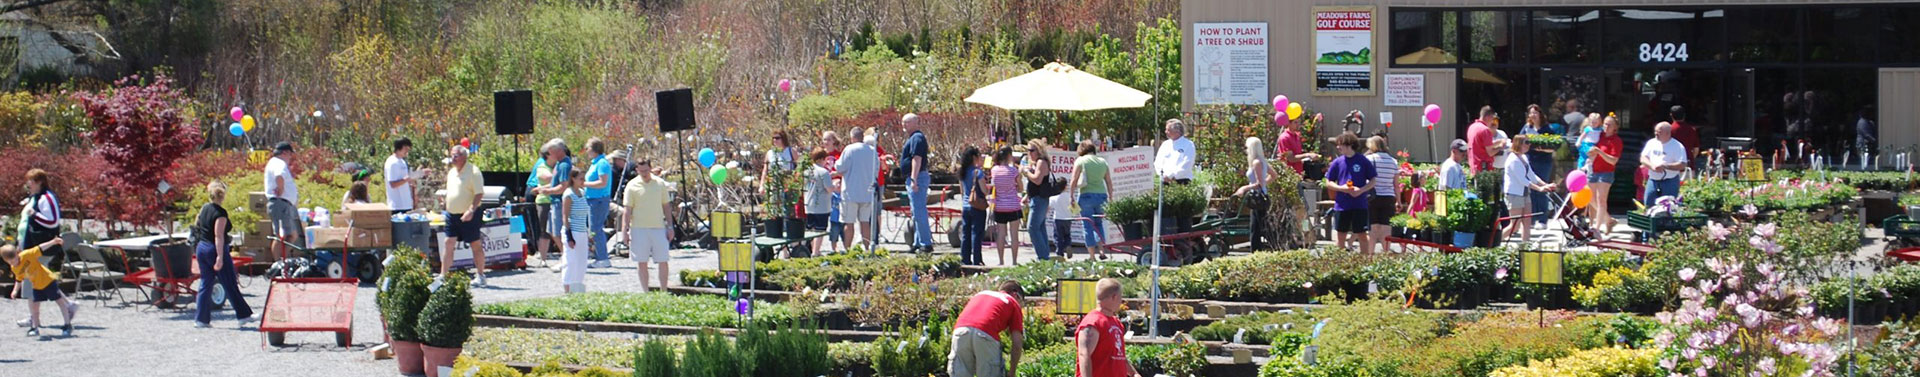 Events and activities at Meadows Farms Nurseries